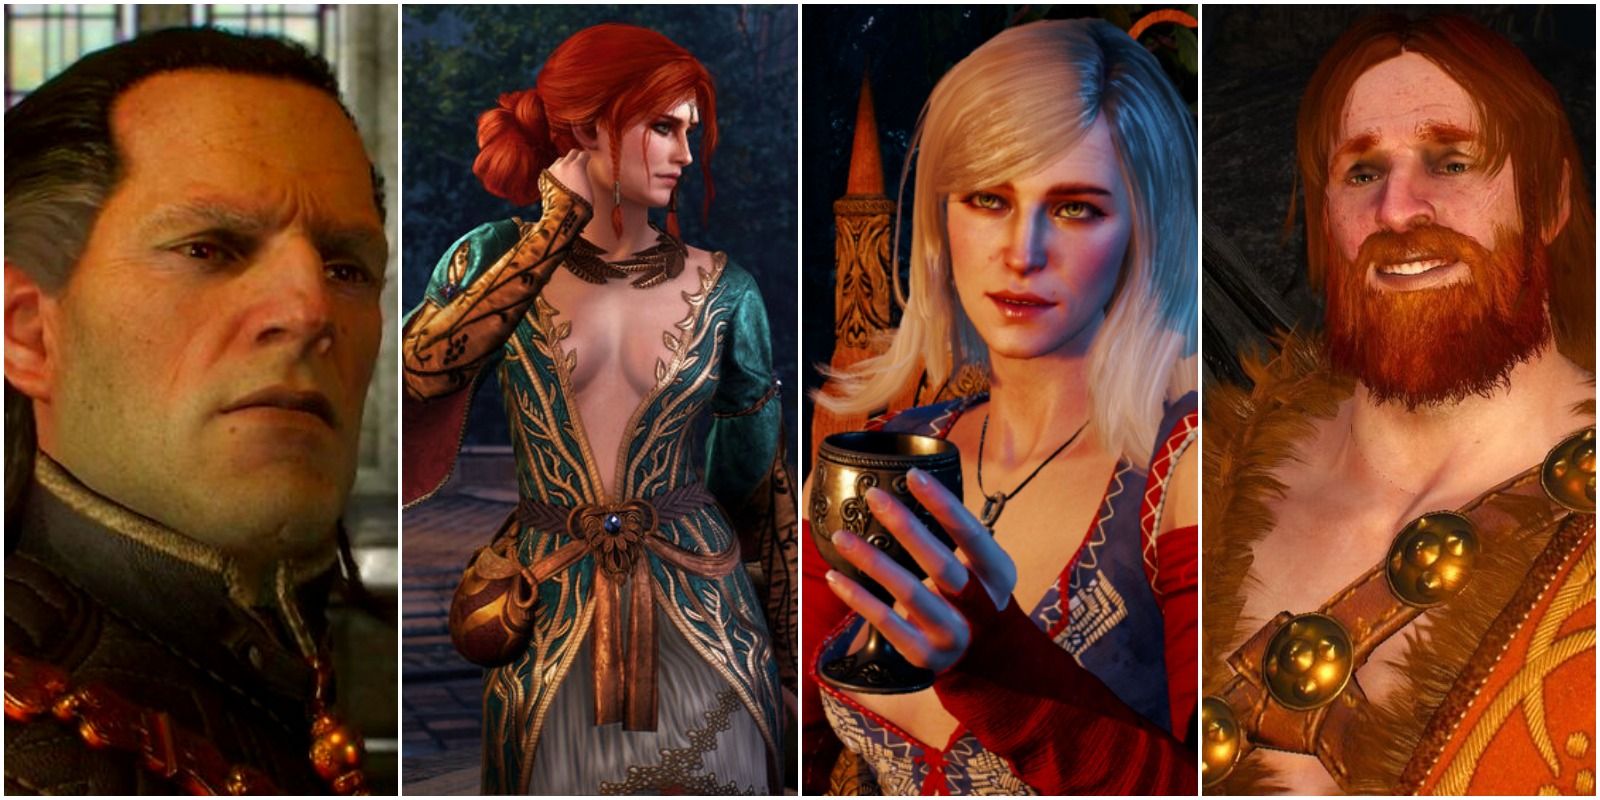 emhyr, triss, keira, and hjalmar from the witcher 3.